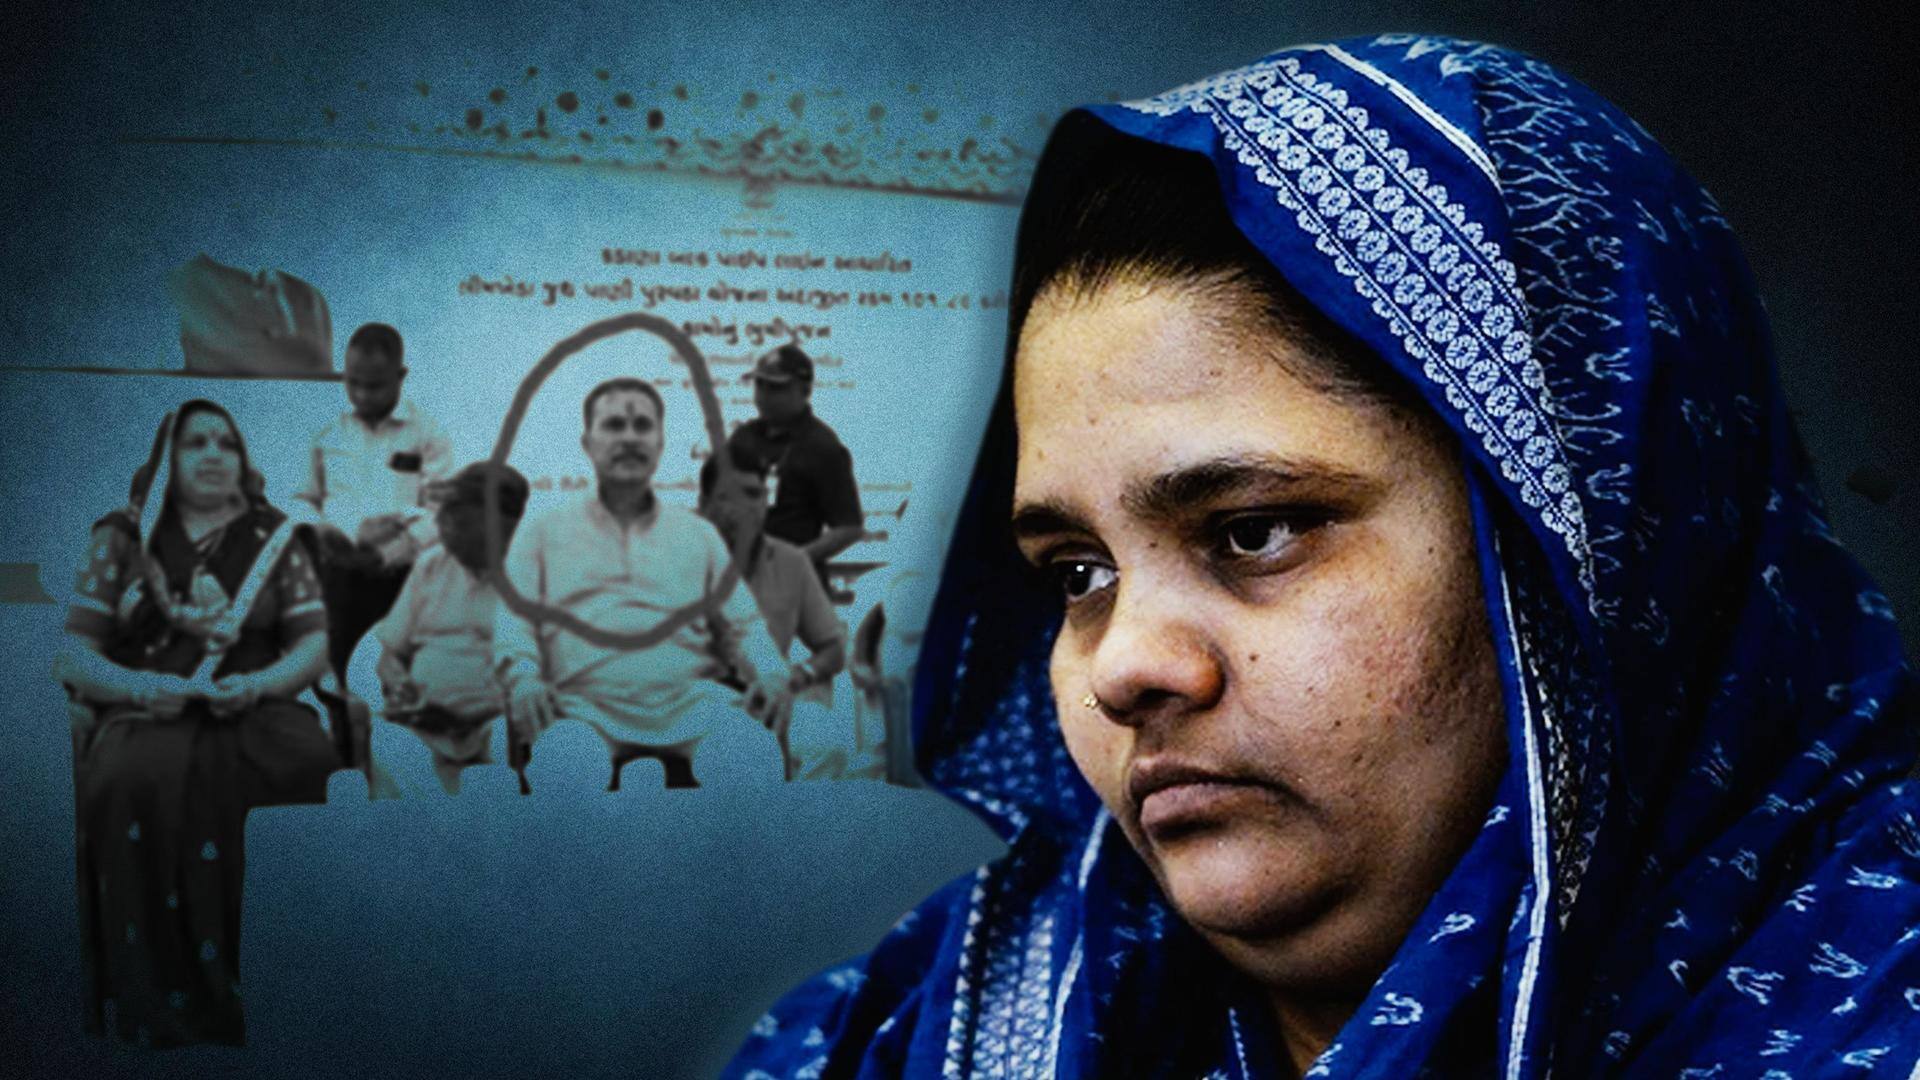 Gujarat: Bilkis Bano gangrape convict shares stage with BJP leaders